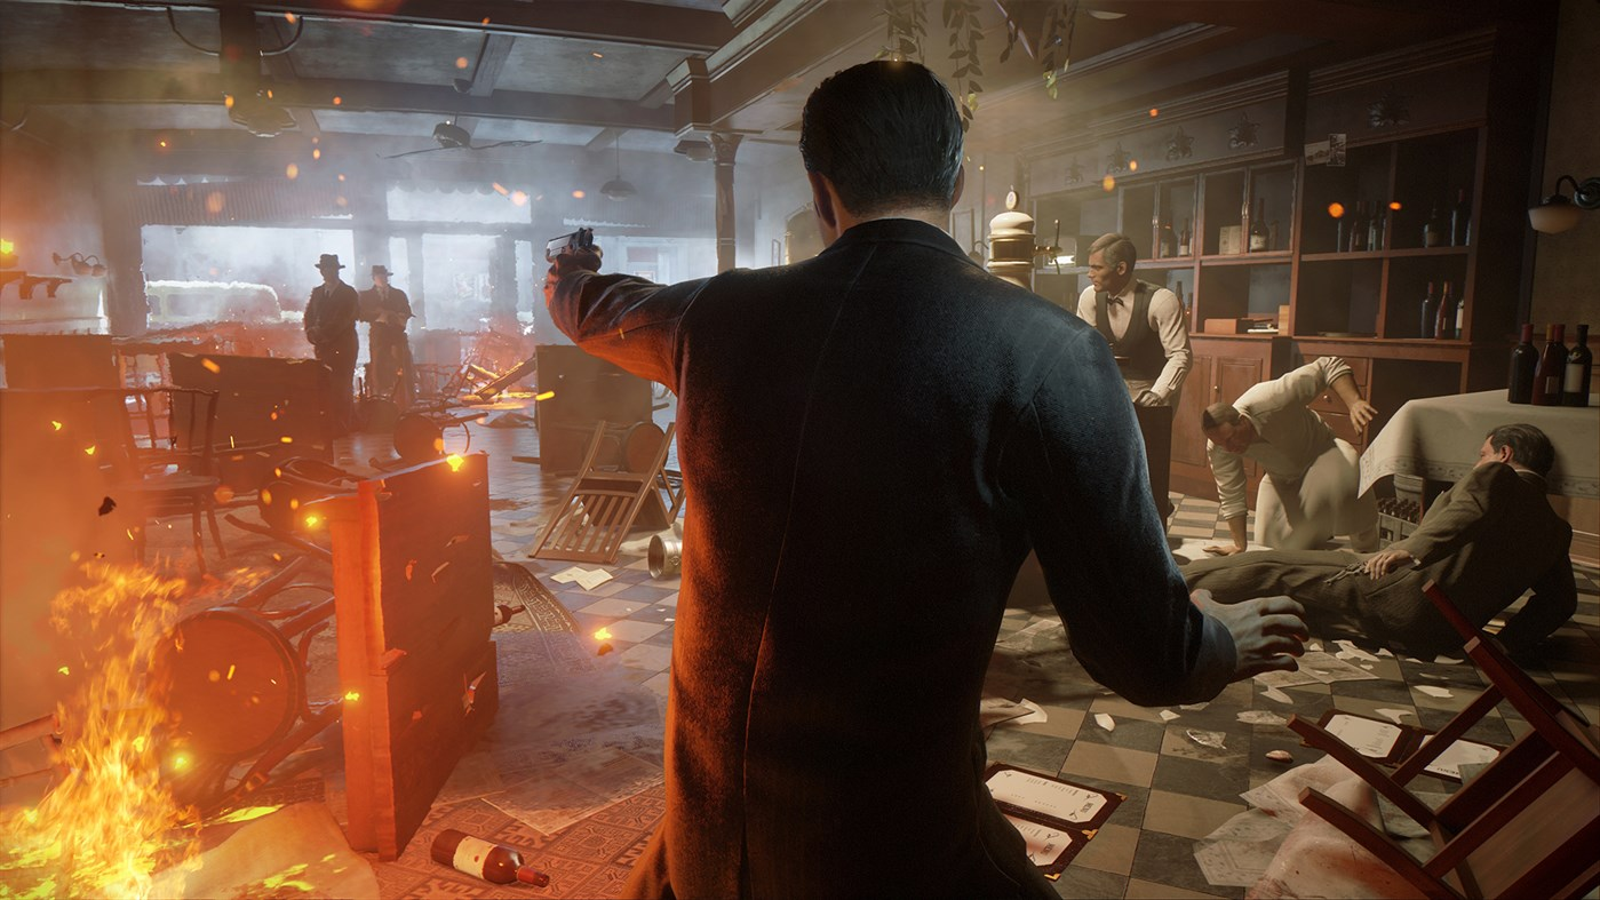 New Mafia 3 DLC Out Now, Take A Look At The Launch Trailer